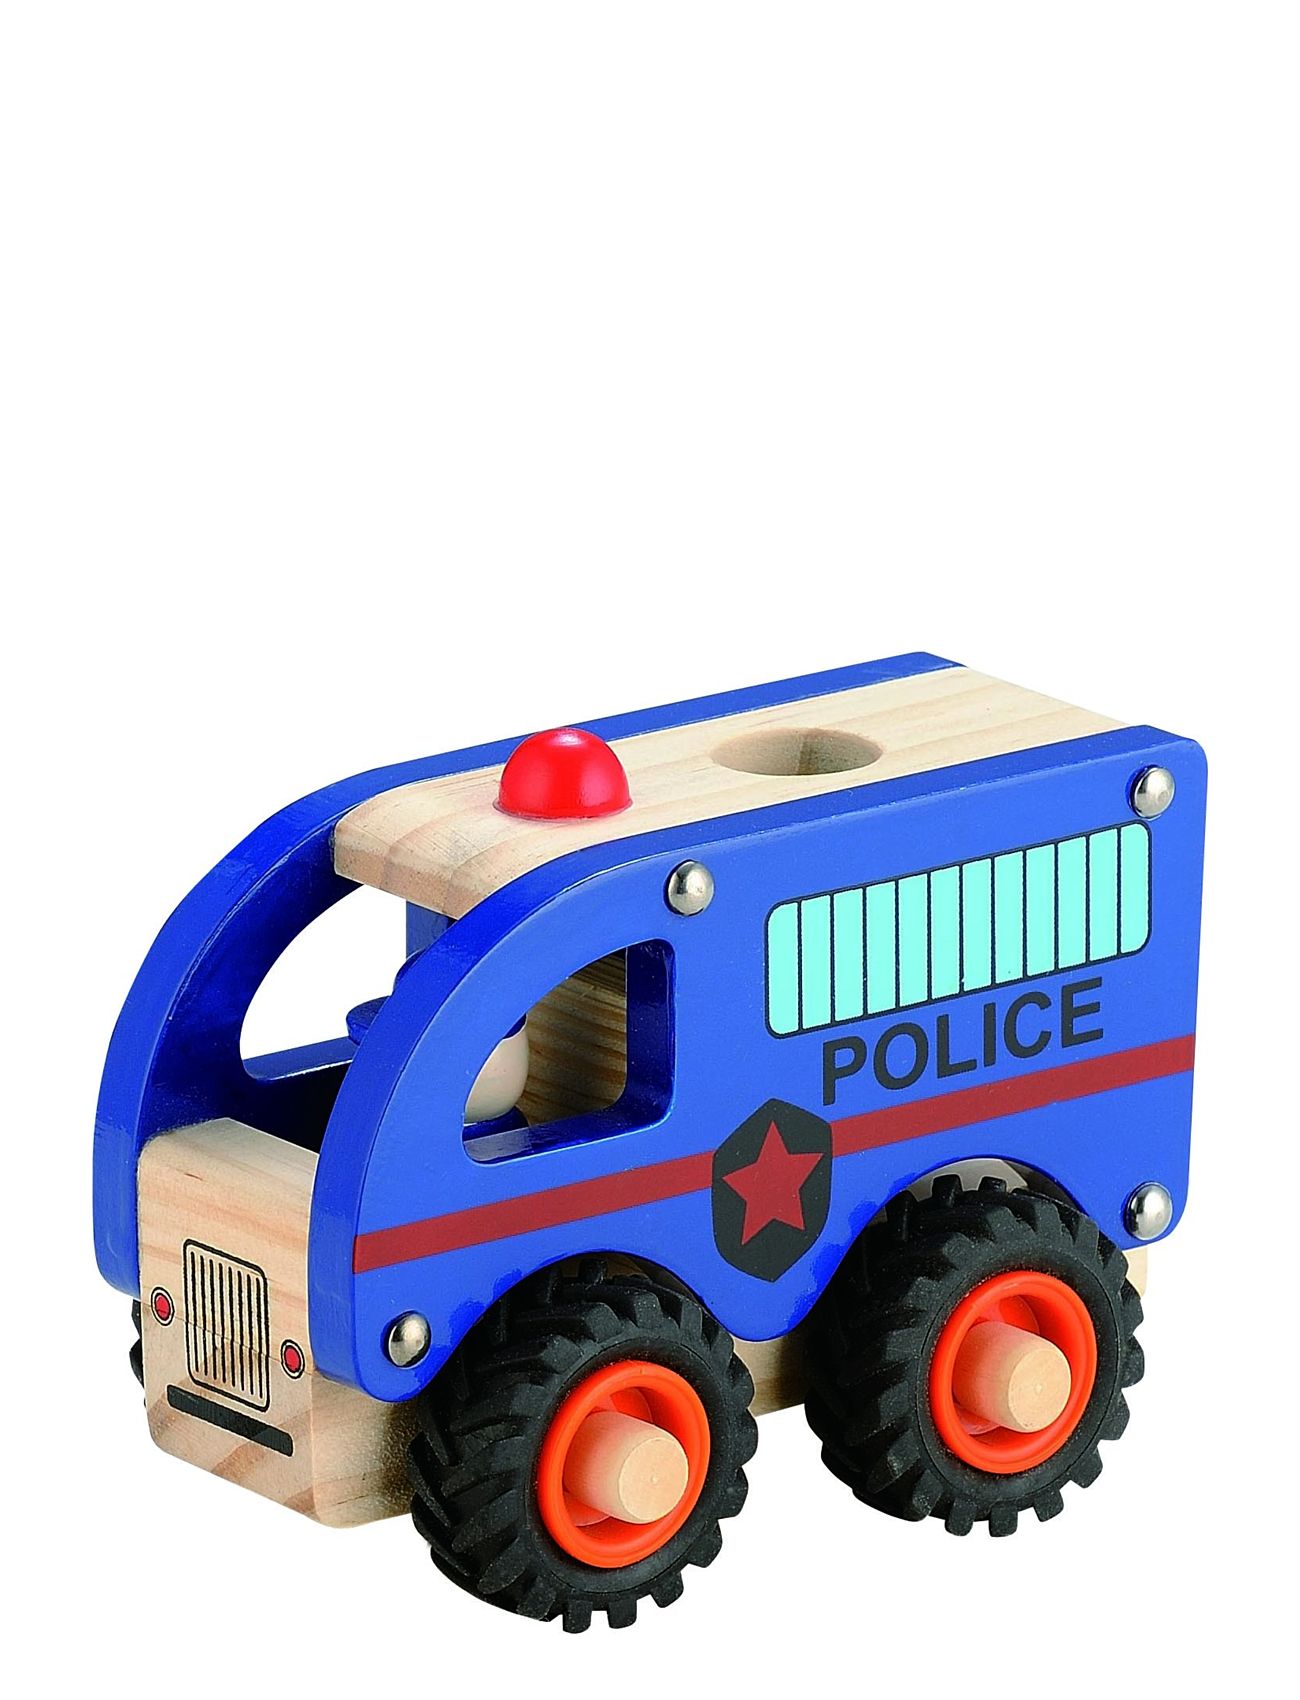 Wooden Police Bus W. Rubber Wheels 100% Fsc Toys Toy Cars & Vehicles Toy Cars Police Cars Blue Magni Toys